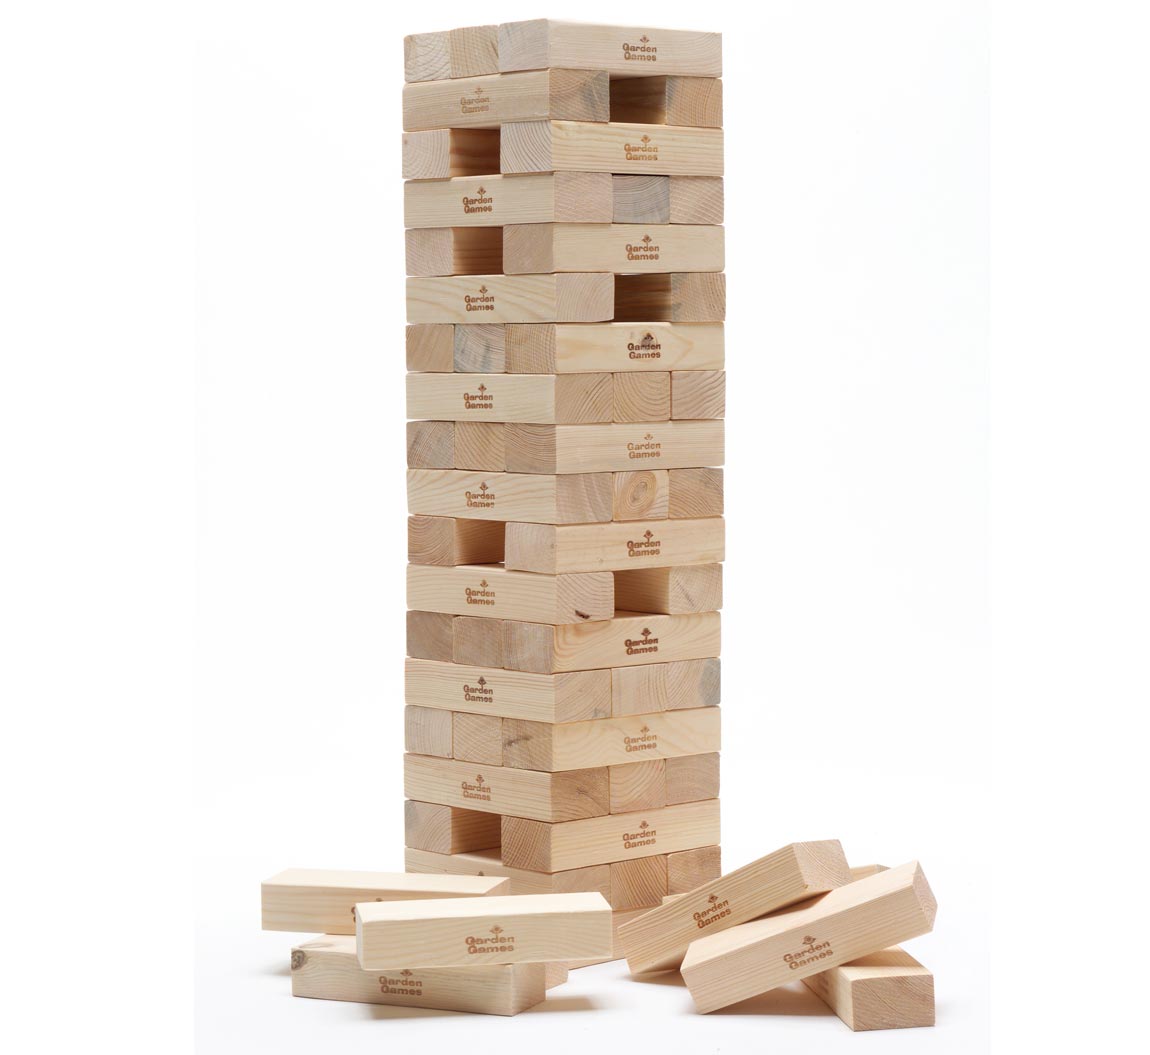 A spin on the classic game of Jenga that family and friends of all ages can enjoy. The larger size of this garden Jenga set provides an enjoyable twist on the classic activity, and with enough blocks for large and small groups of players, this is the ideal game for families, leisure centres and more.